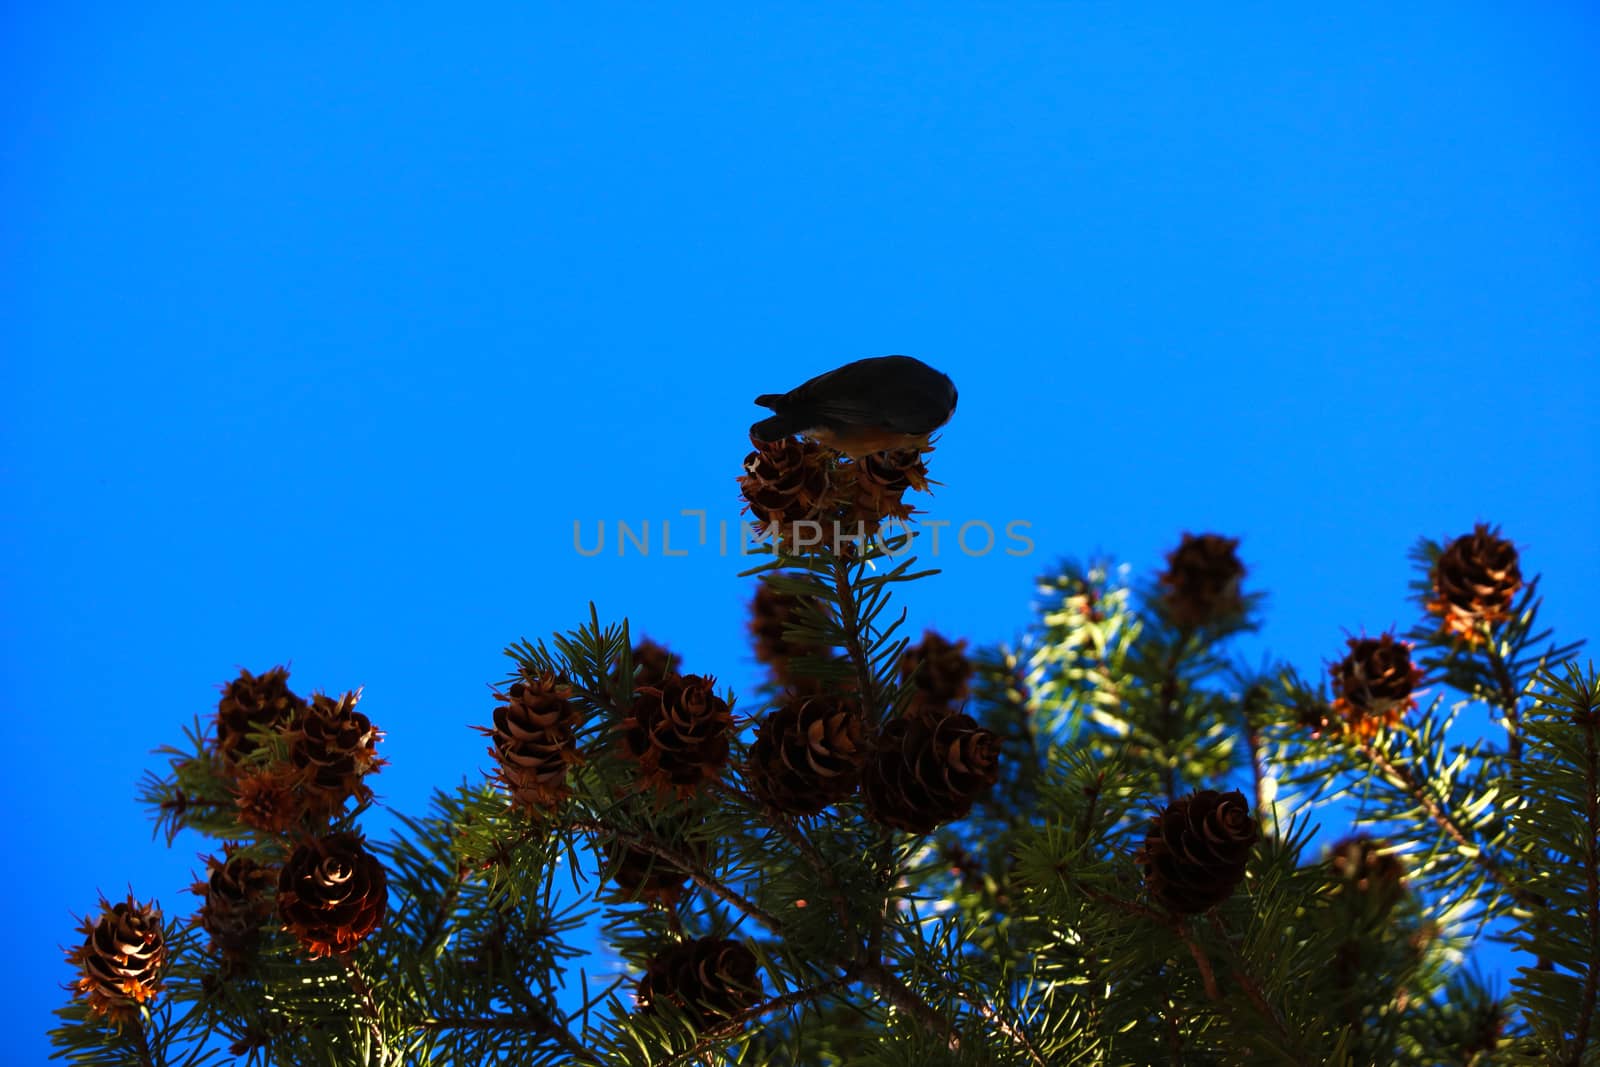 View of pine branches and cones against the blue sky. by kip02kas